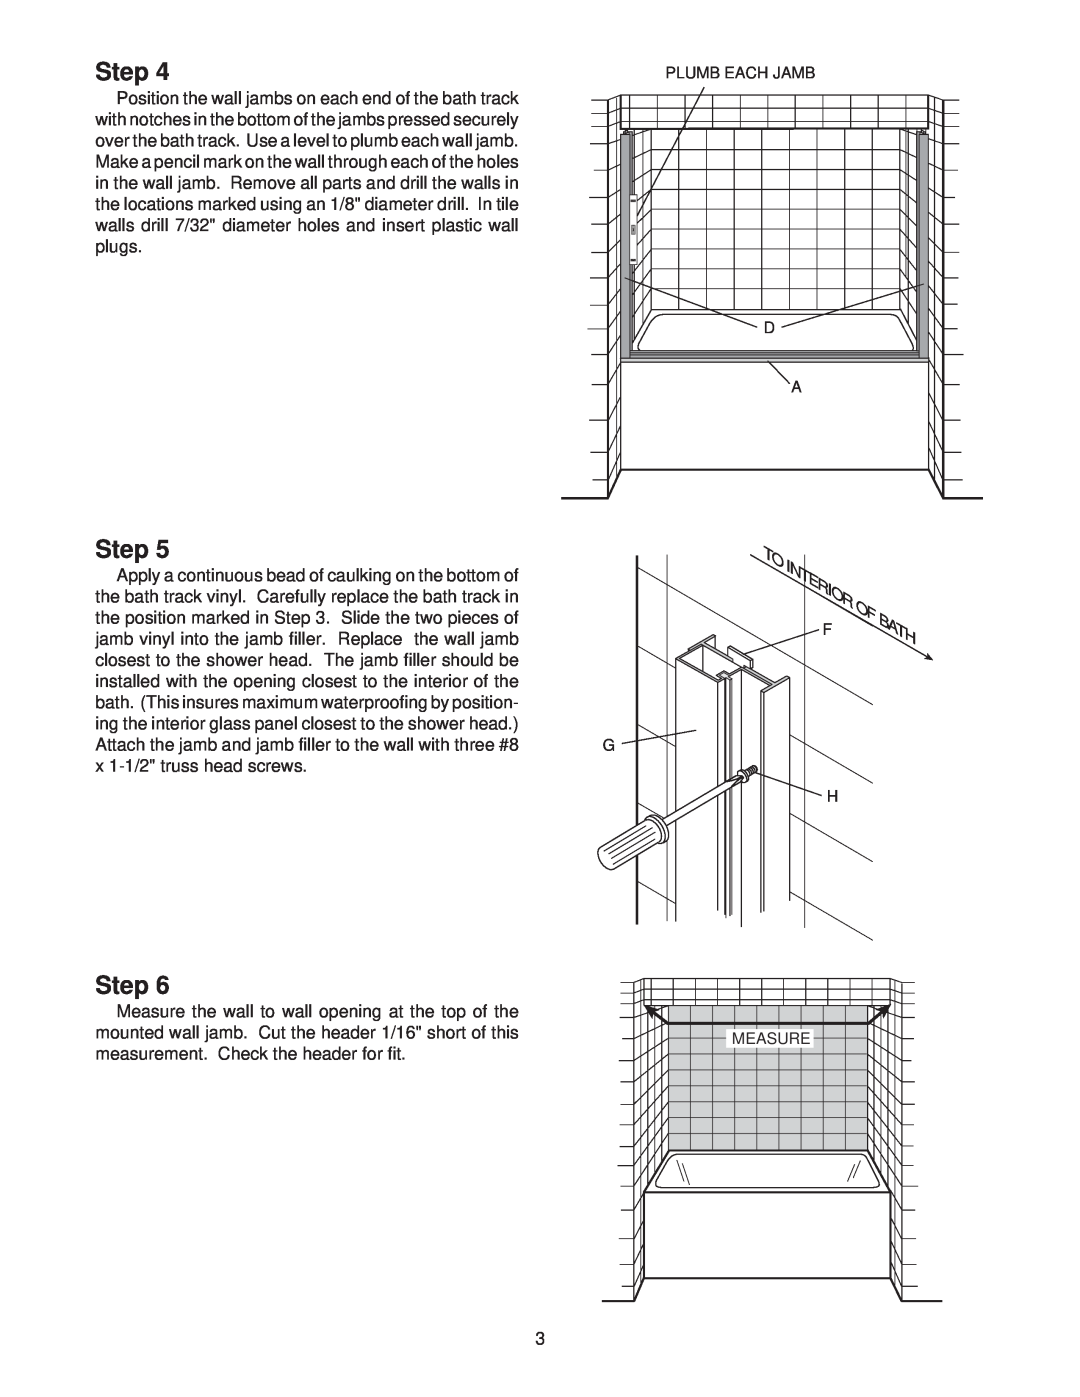 Jacuzzi Steam Enclosure installation instructions Step 